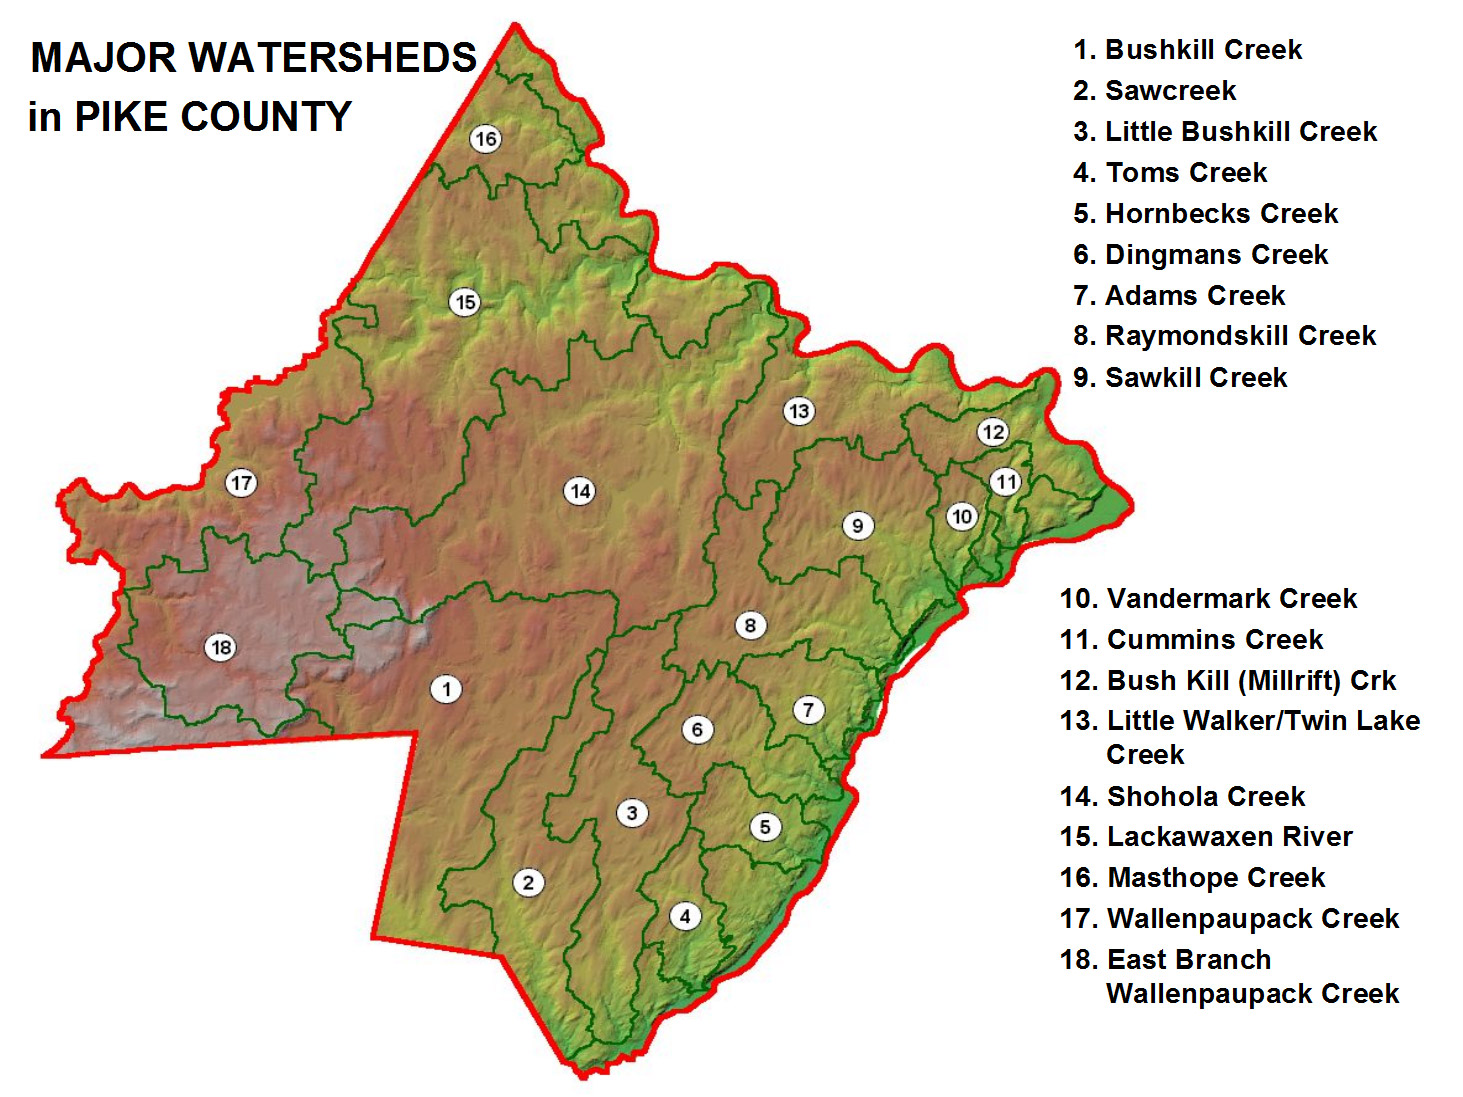 A watershed map showing the location of all 18 watersheds within Pike County